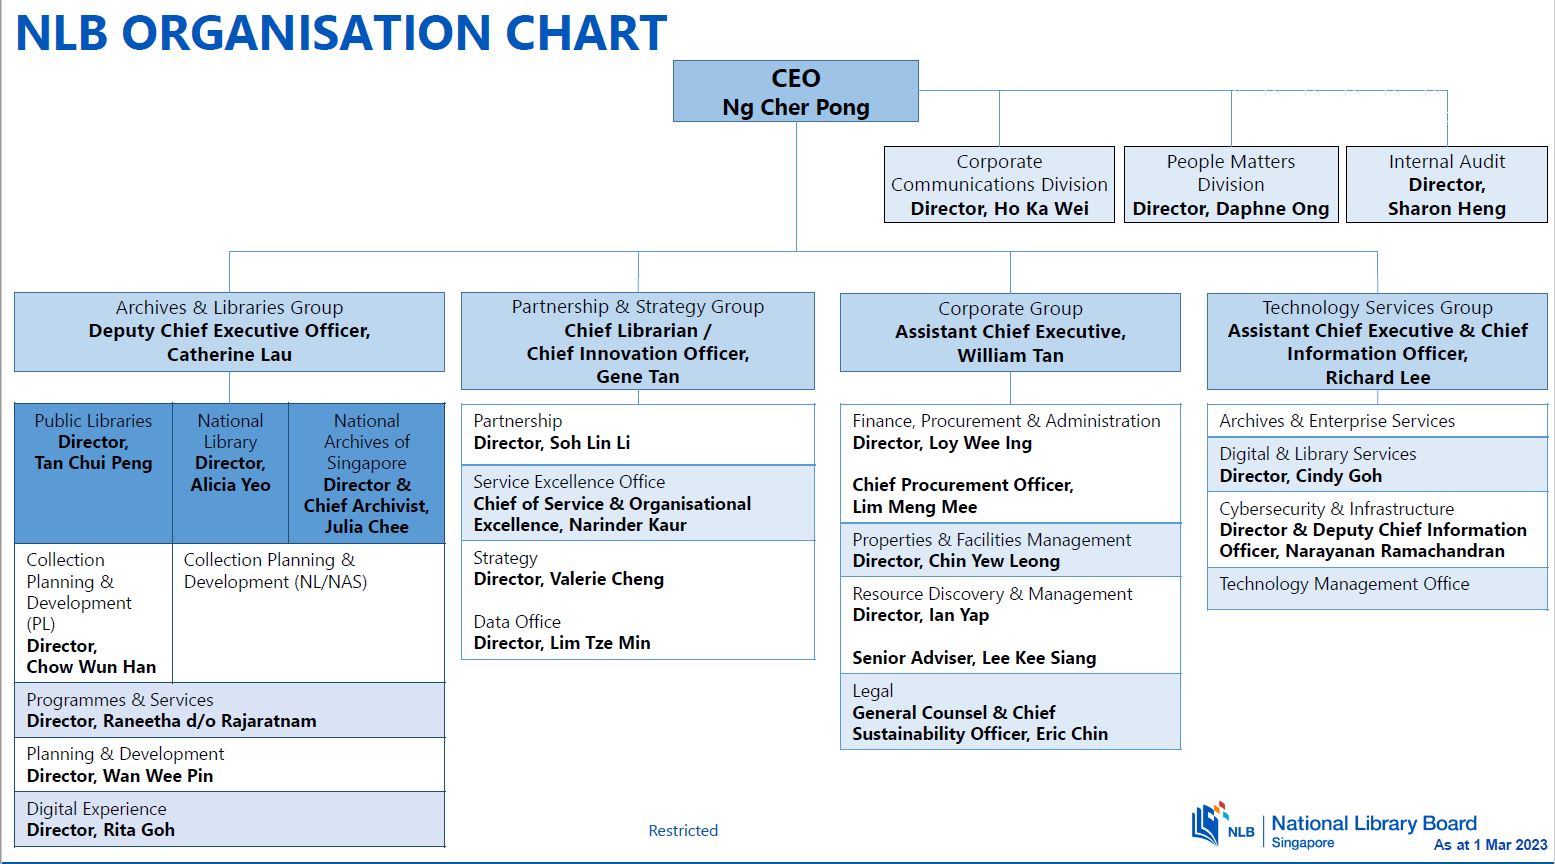 NLB Organisation Chart as of 1 March 2023